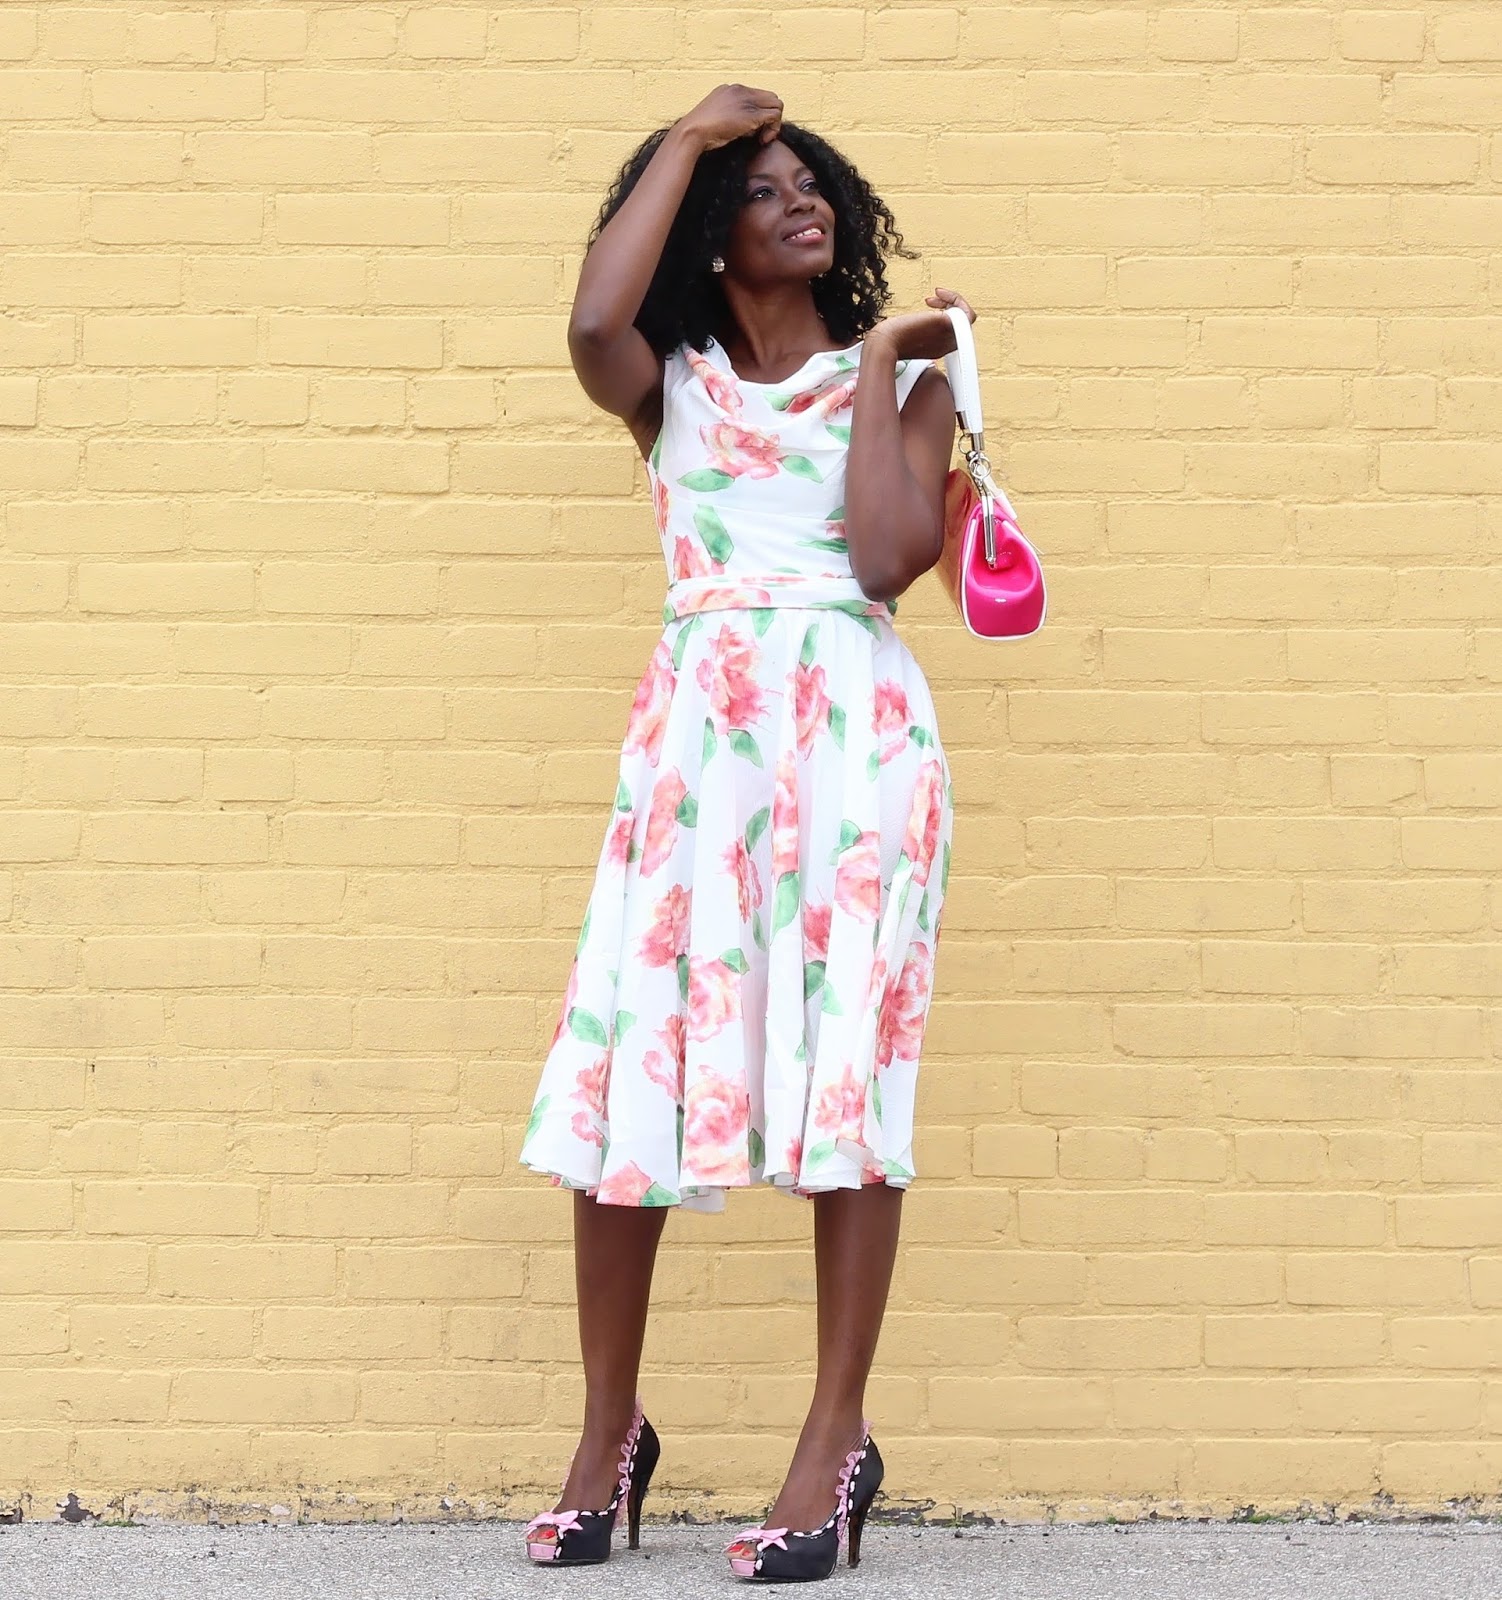 Iconic Pink and Floral Scoop Neck Belted Swing Dress, Retro Style Raspberry Pink Floozy Kiss Lock Purse, Black and Pink Peep Toe Ruffle Liberia Heels by Unique Vintage